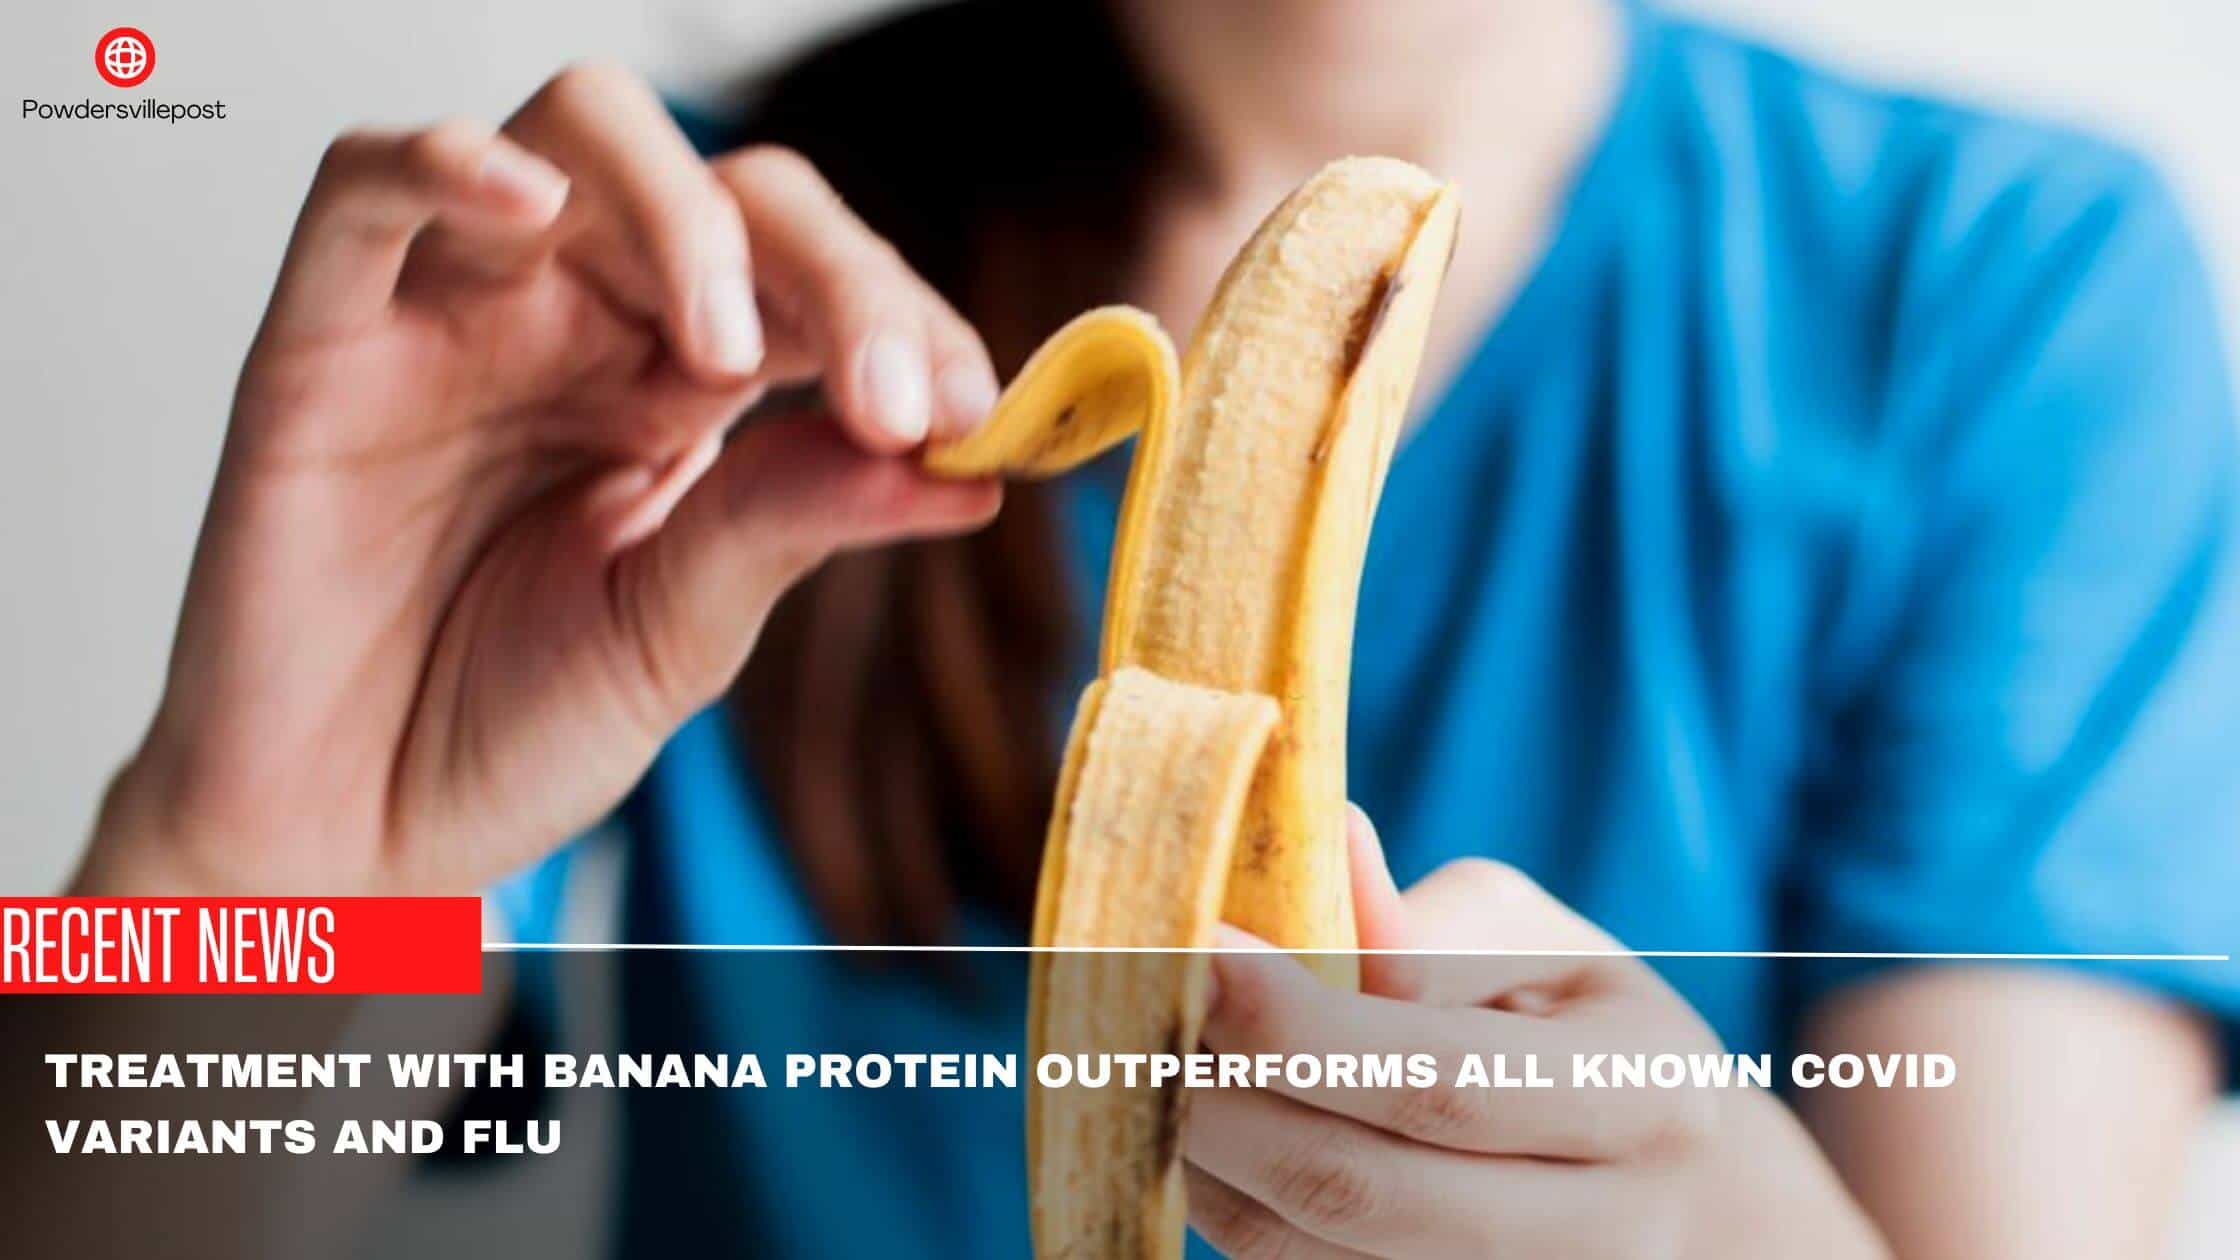 Treatment With Banana Protein Outperforms All Known Covid Variants And Flu